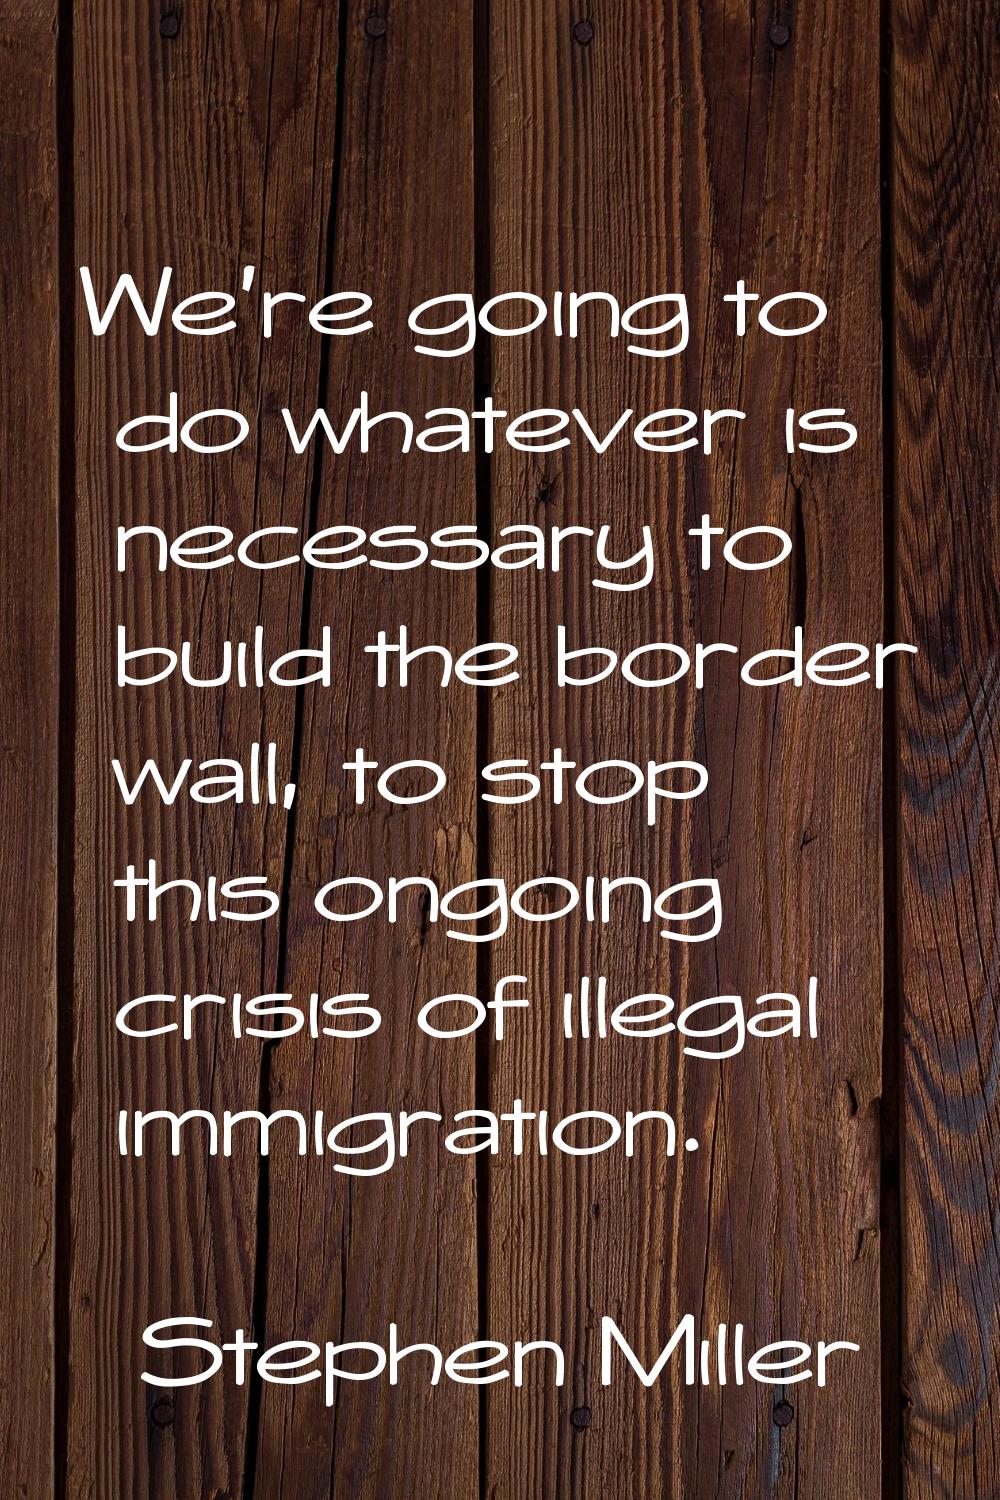 We're going to do whatever is necessary to build the border wall, to stop this ongoing crisis of il